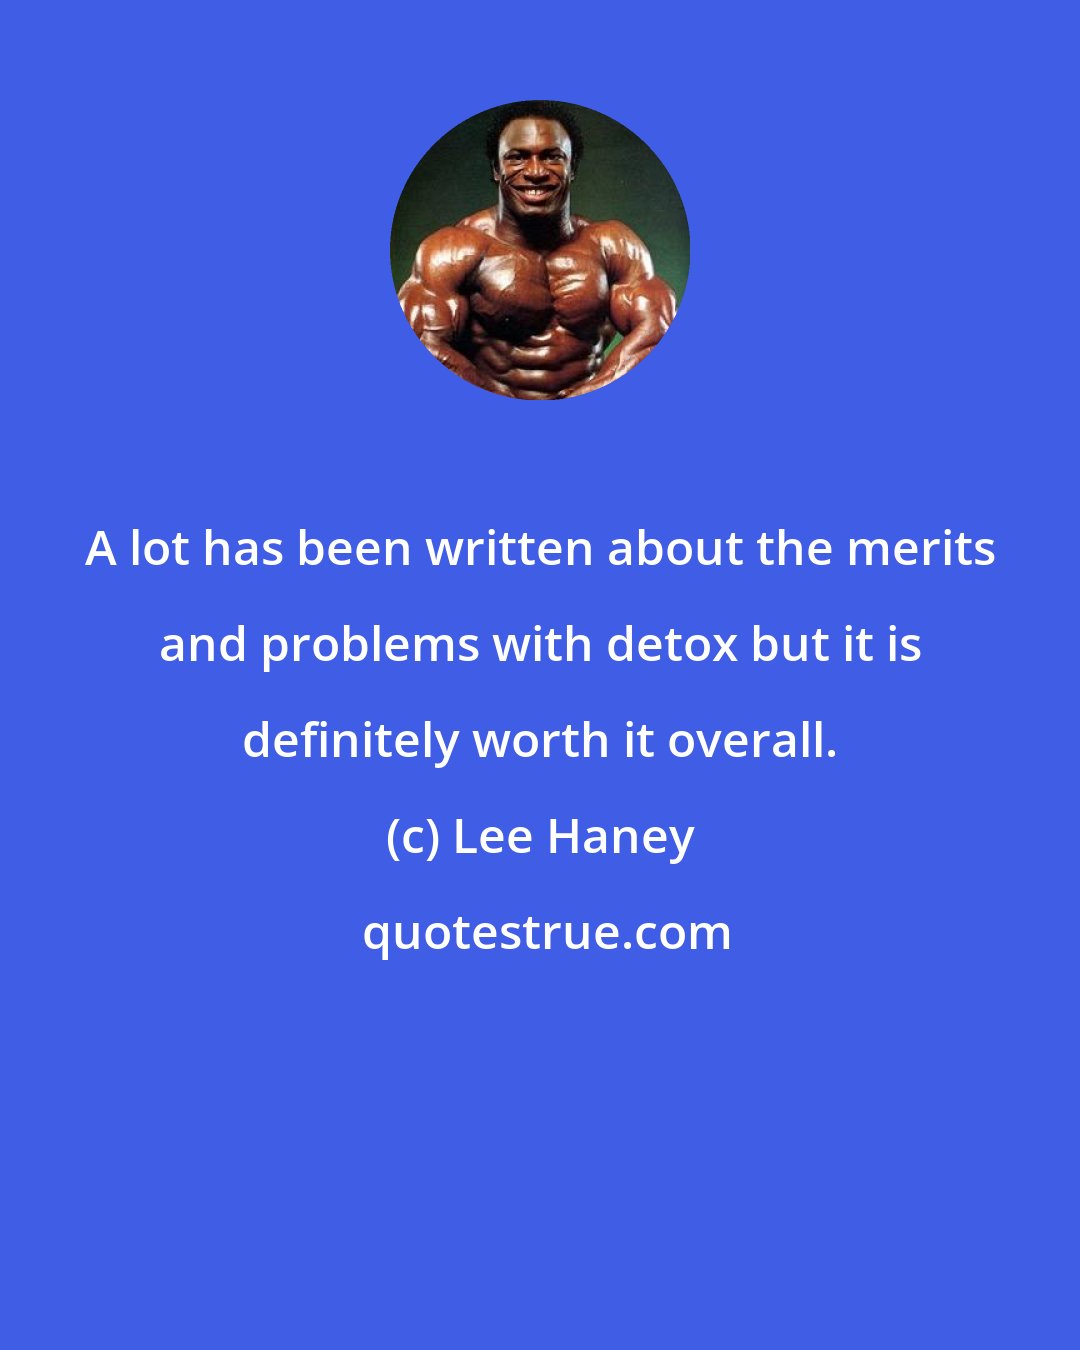 Lee Haney: A lot has been written about the merits and problems with detox but it is definitely worth it overall.